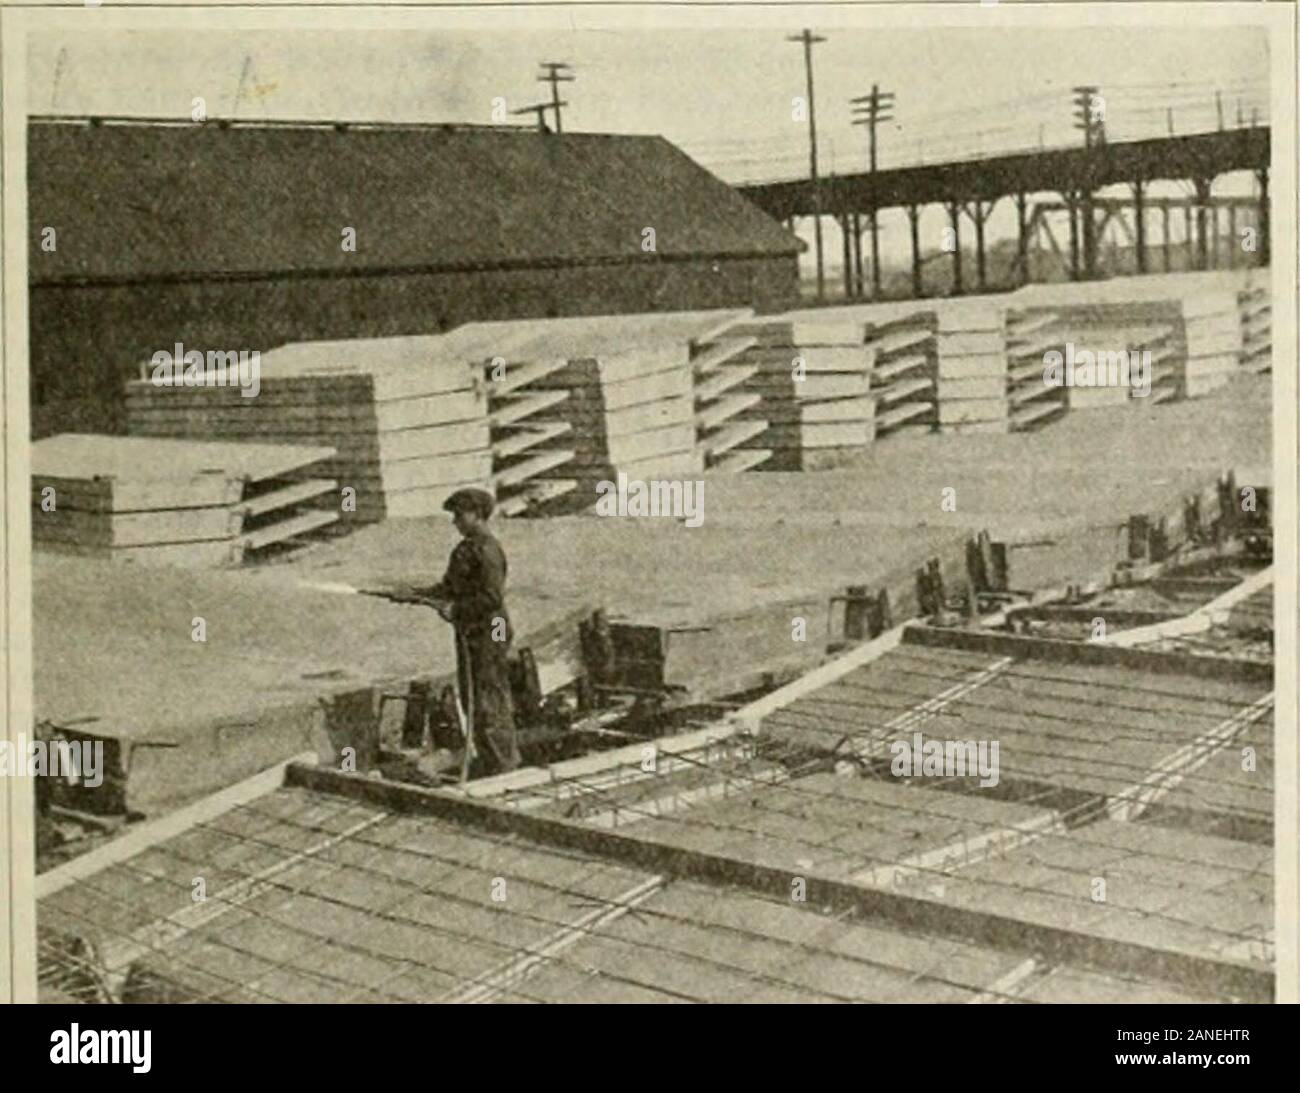 Engineering and Contracting . Fig. 7—General View of Casting Yard. tate the removal of units from the forfns all beams aregiven a bevel of 3 in. on both sides. The roof slabs and beams were designed for a totalload of 70 lb. per square foot, of which 82 lb. per square L7 ft. 8 in. and weigh about 7,000 lb. each. The columnsare reinforced with four 1-in. square bars tied togetherwith ^,4-in. diameter hoops spaced about 10 in. on centers.To protect the edges of column, a steel guard angle about. Fig. 8—Roof Slab Units in Various Stages cf Construction. foot is live load. These numbers were consi Stock Photo